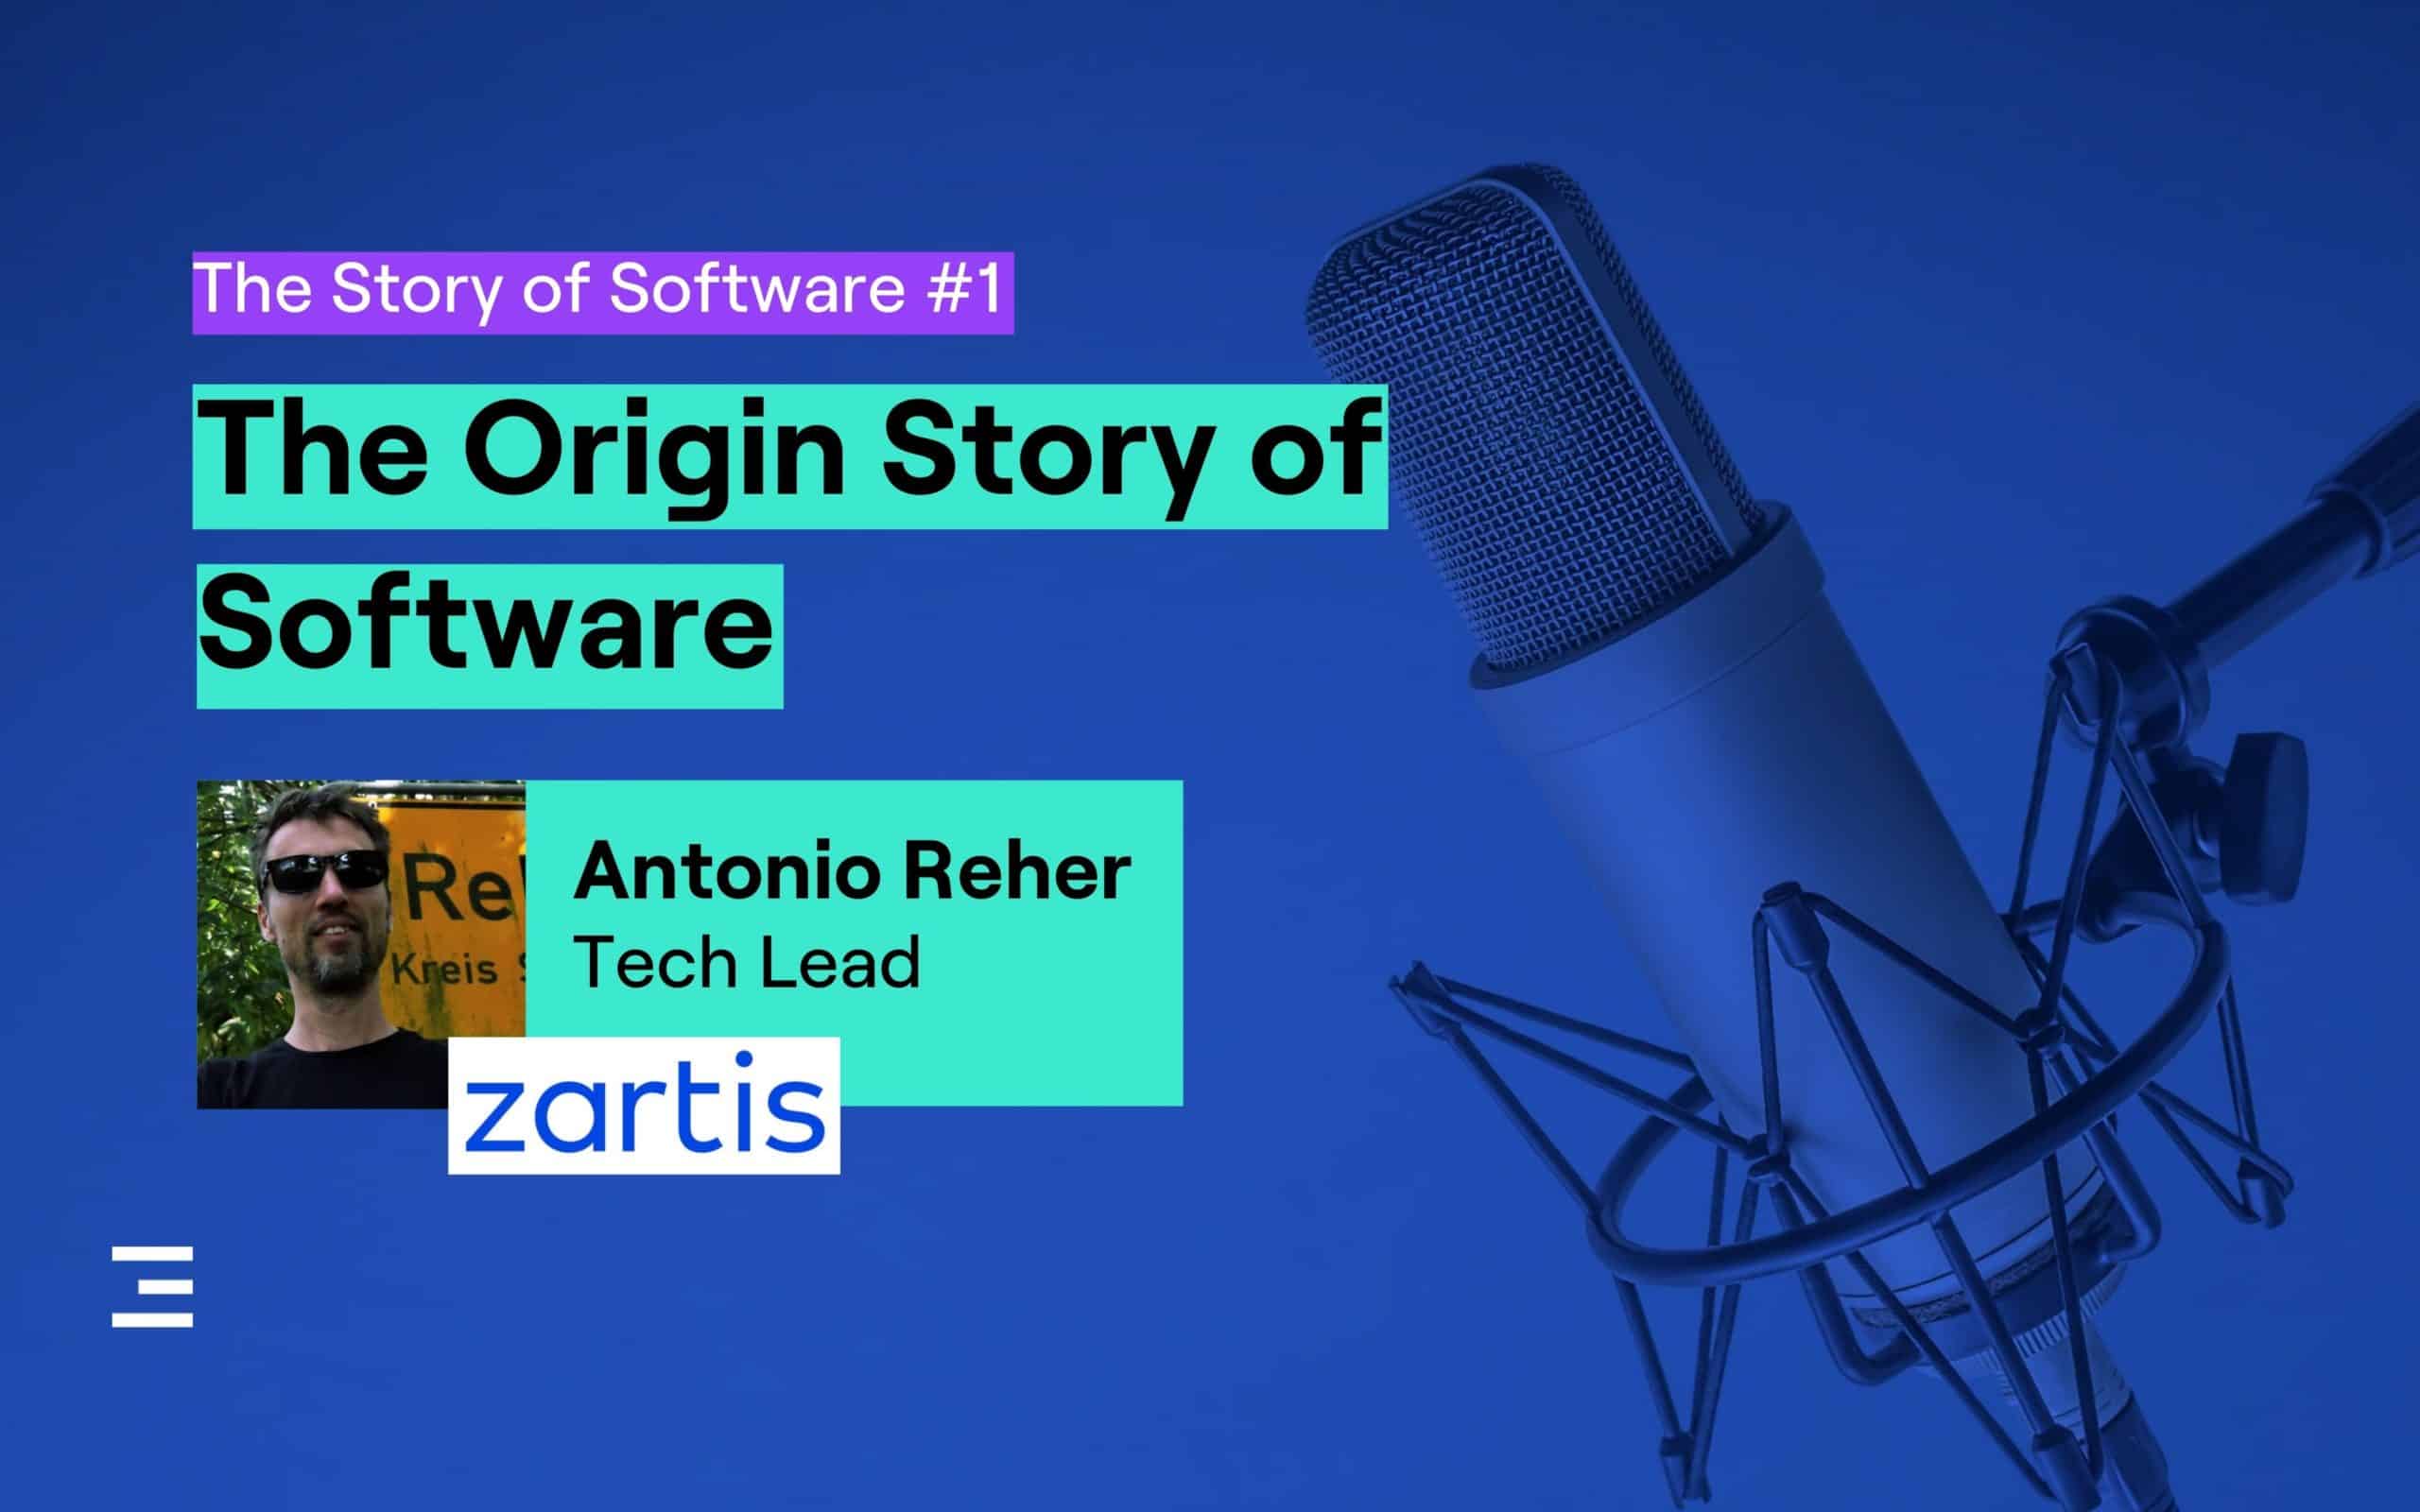 The Story of Software podcast episode 1 - the origin story of software with Antonio Reher